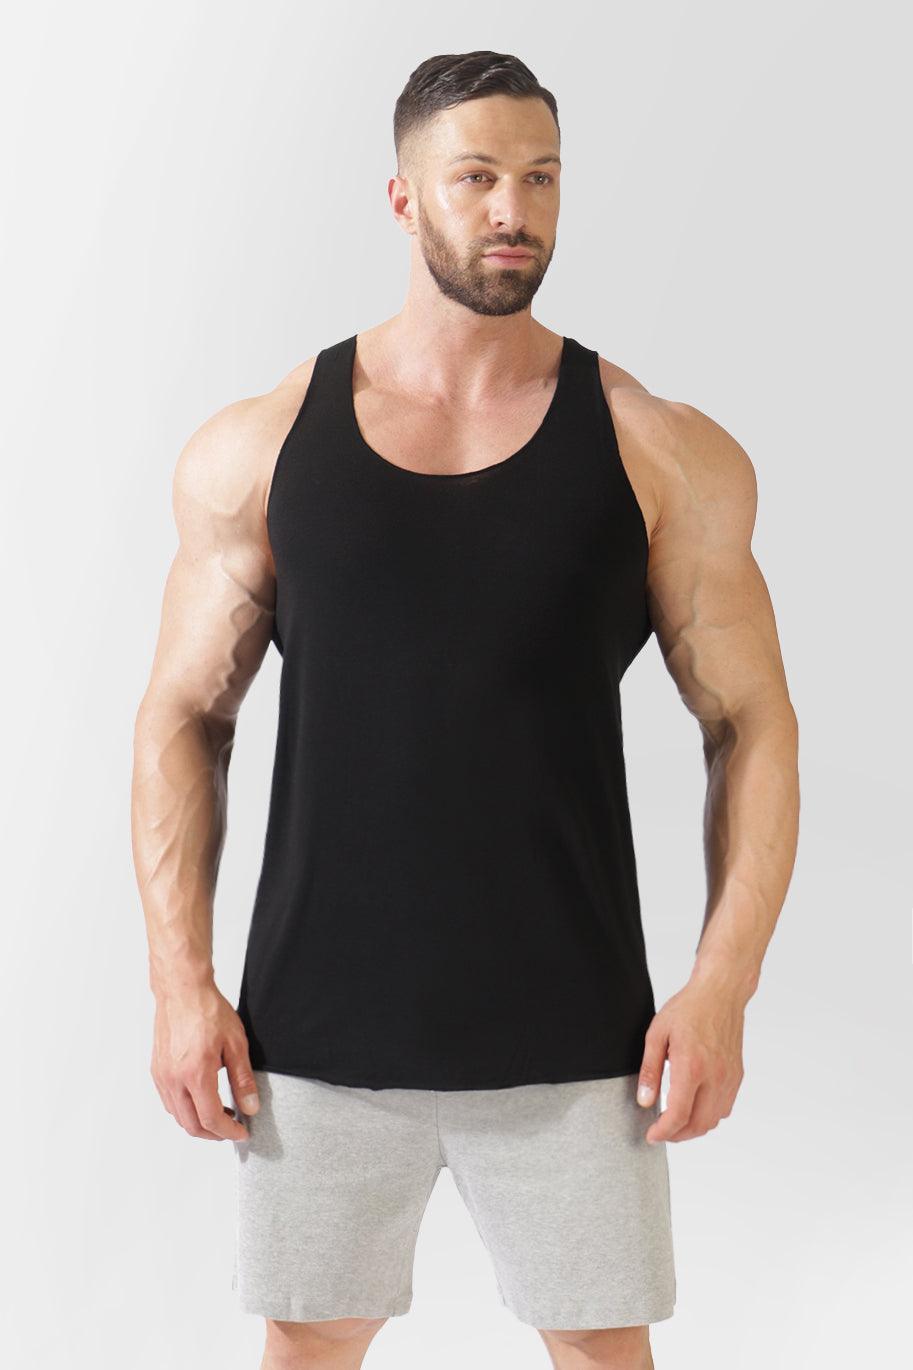 Training Raw-Edge Muscle Tank Top - Black - Jed North